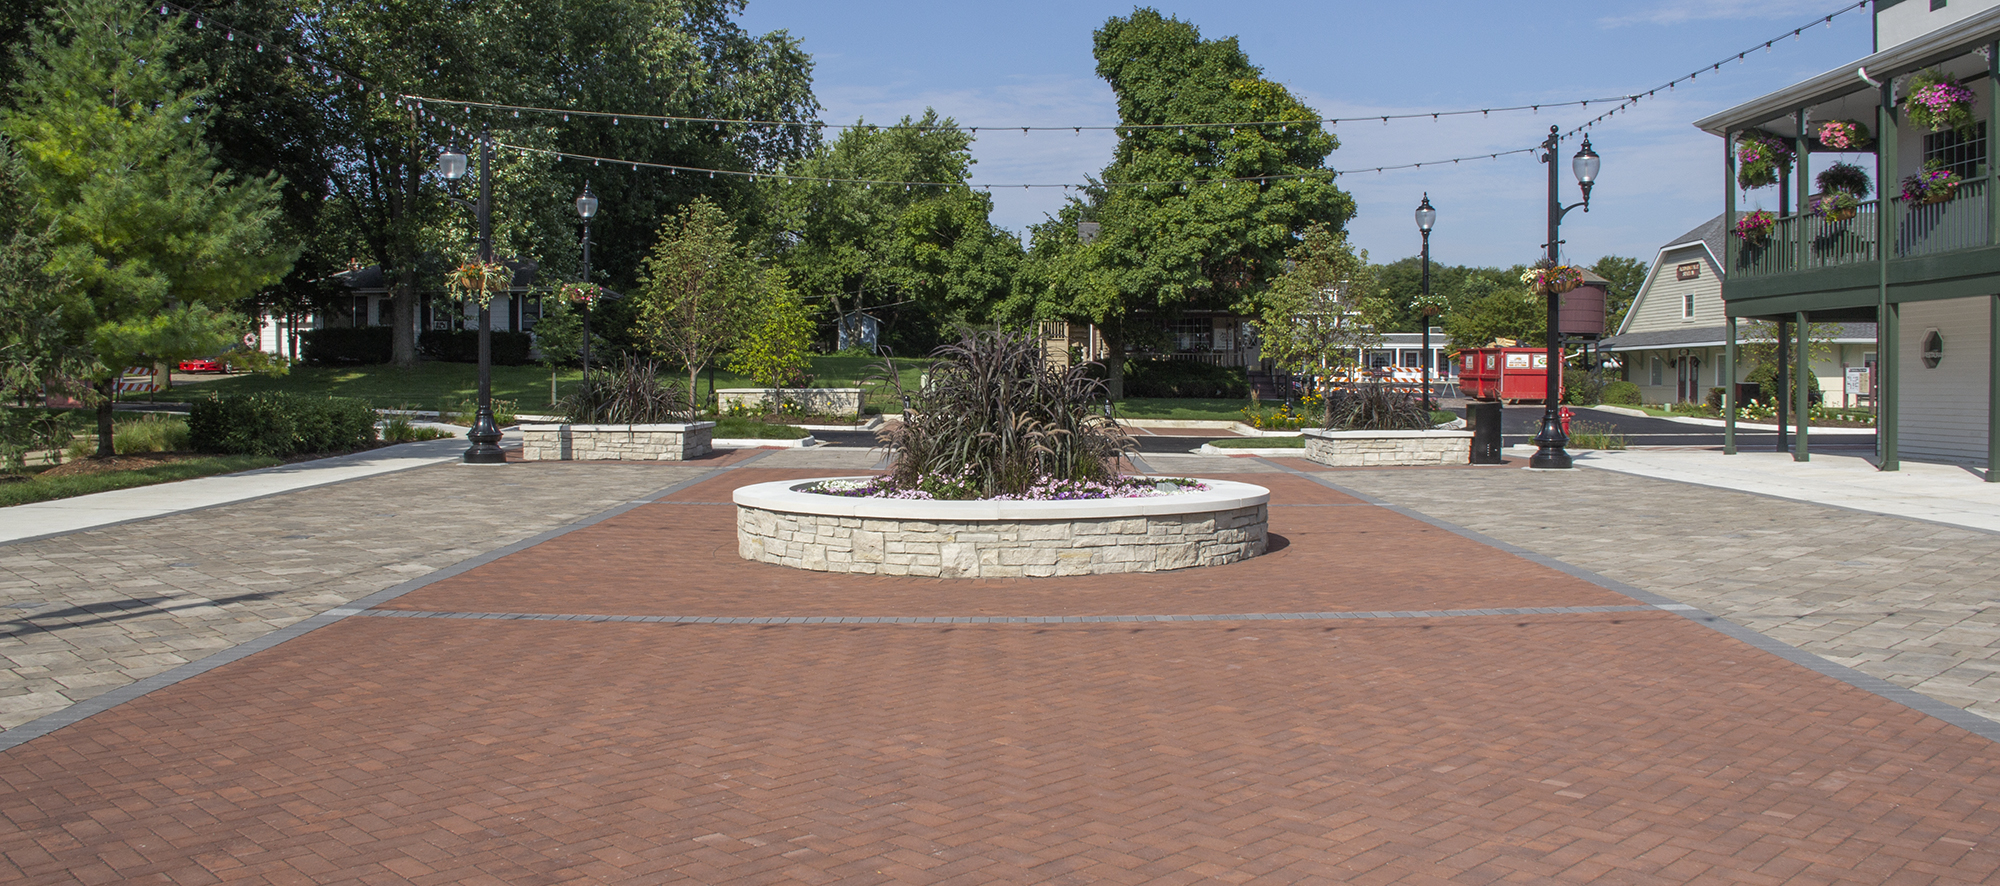 Surrounded by trees and grass, Unilock pavers in contrasting colors create a pedestrian area with a circular walled garden in the middle.